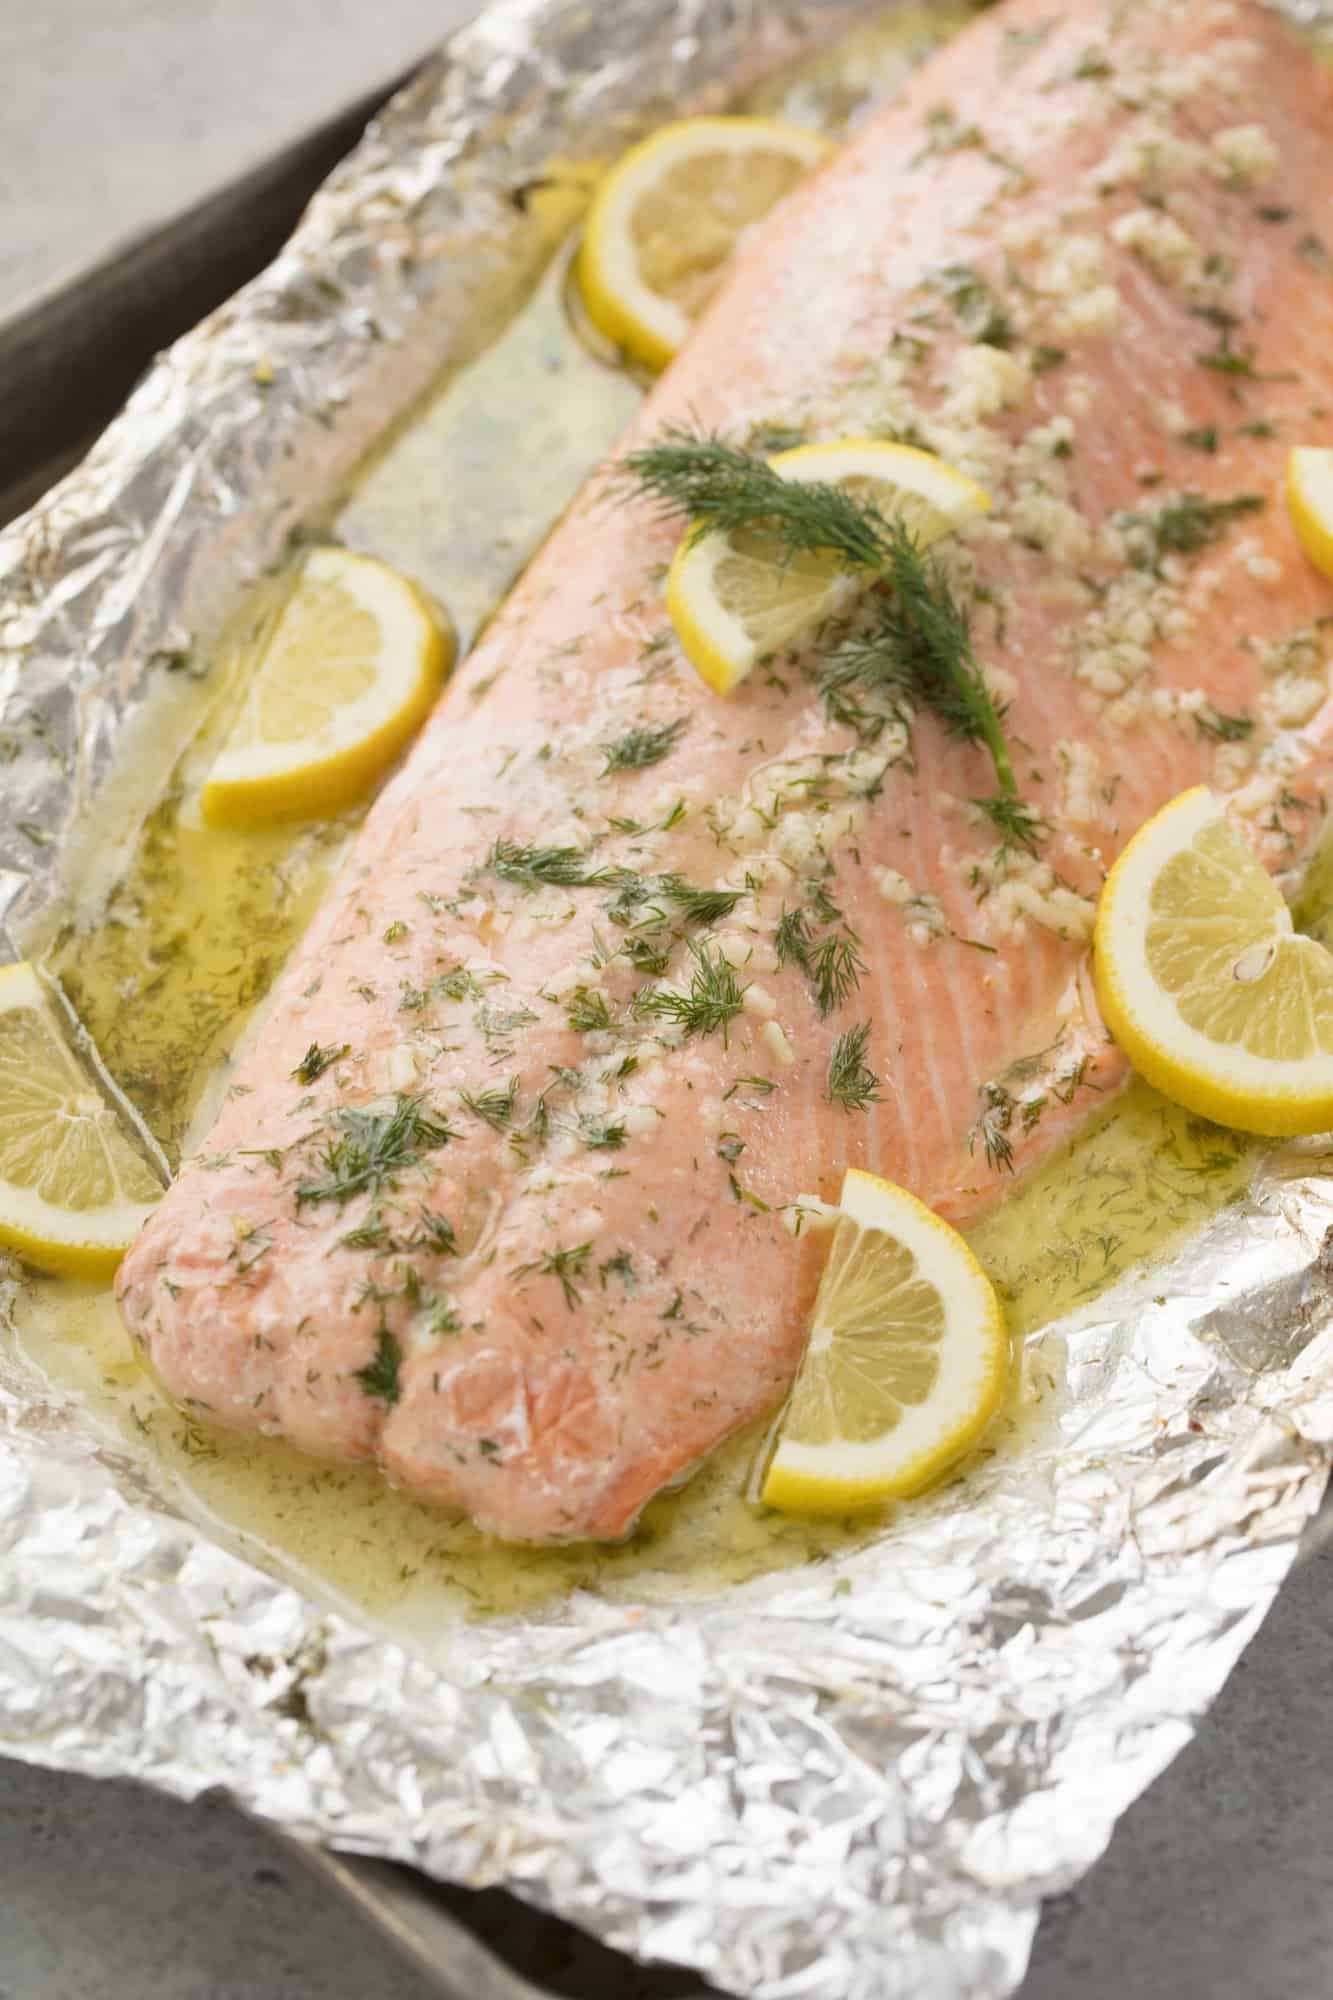 It doesn't get much easier than this Easy 5 Ingredient Baked Salmon with a garlic, lemon, and dill butter sauce. All it takes is 5 ingredients and 20 minutes of your time. So simple, so flavorful!